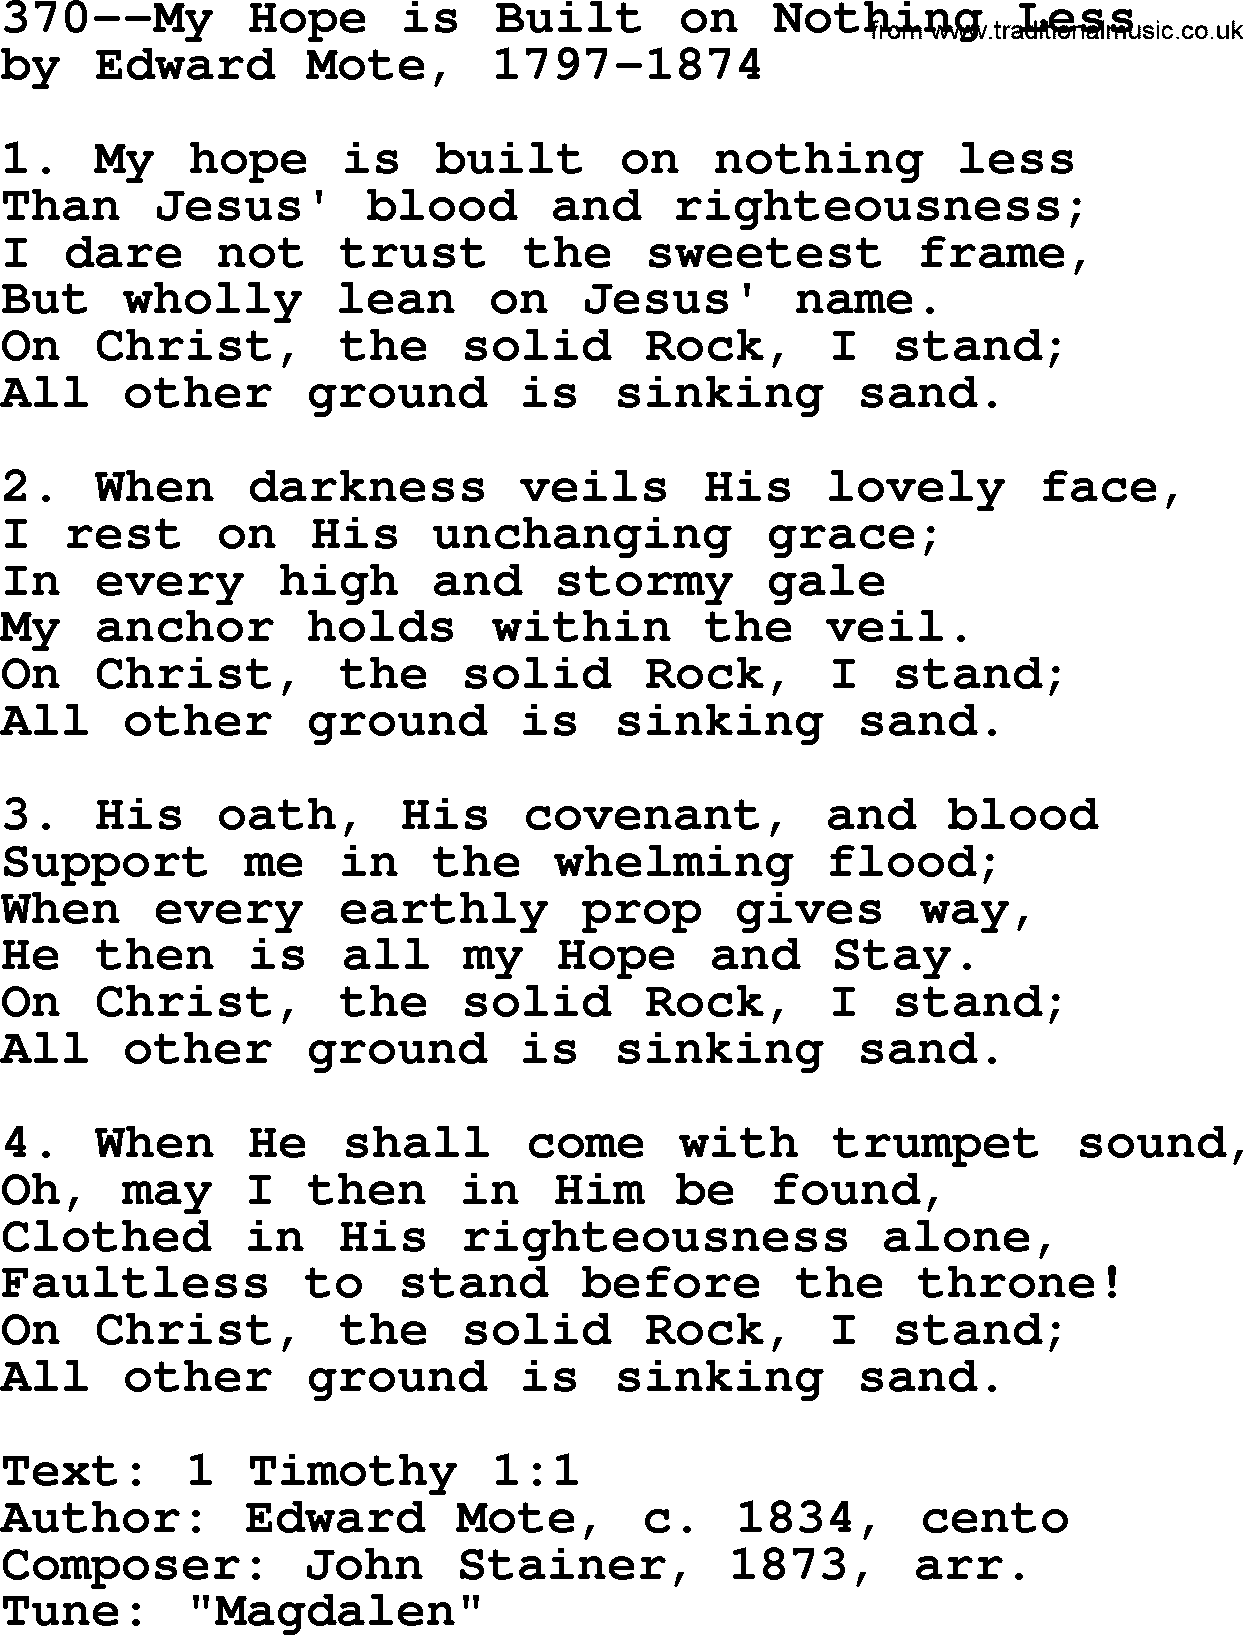 Lutheran Hymn: 370--My Hope is Built on Nothing Less.txt lyrics with PDF